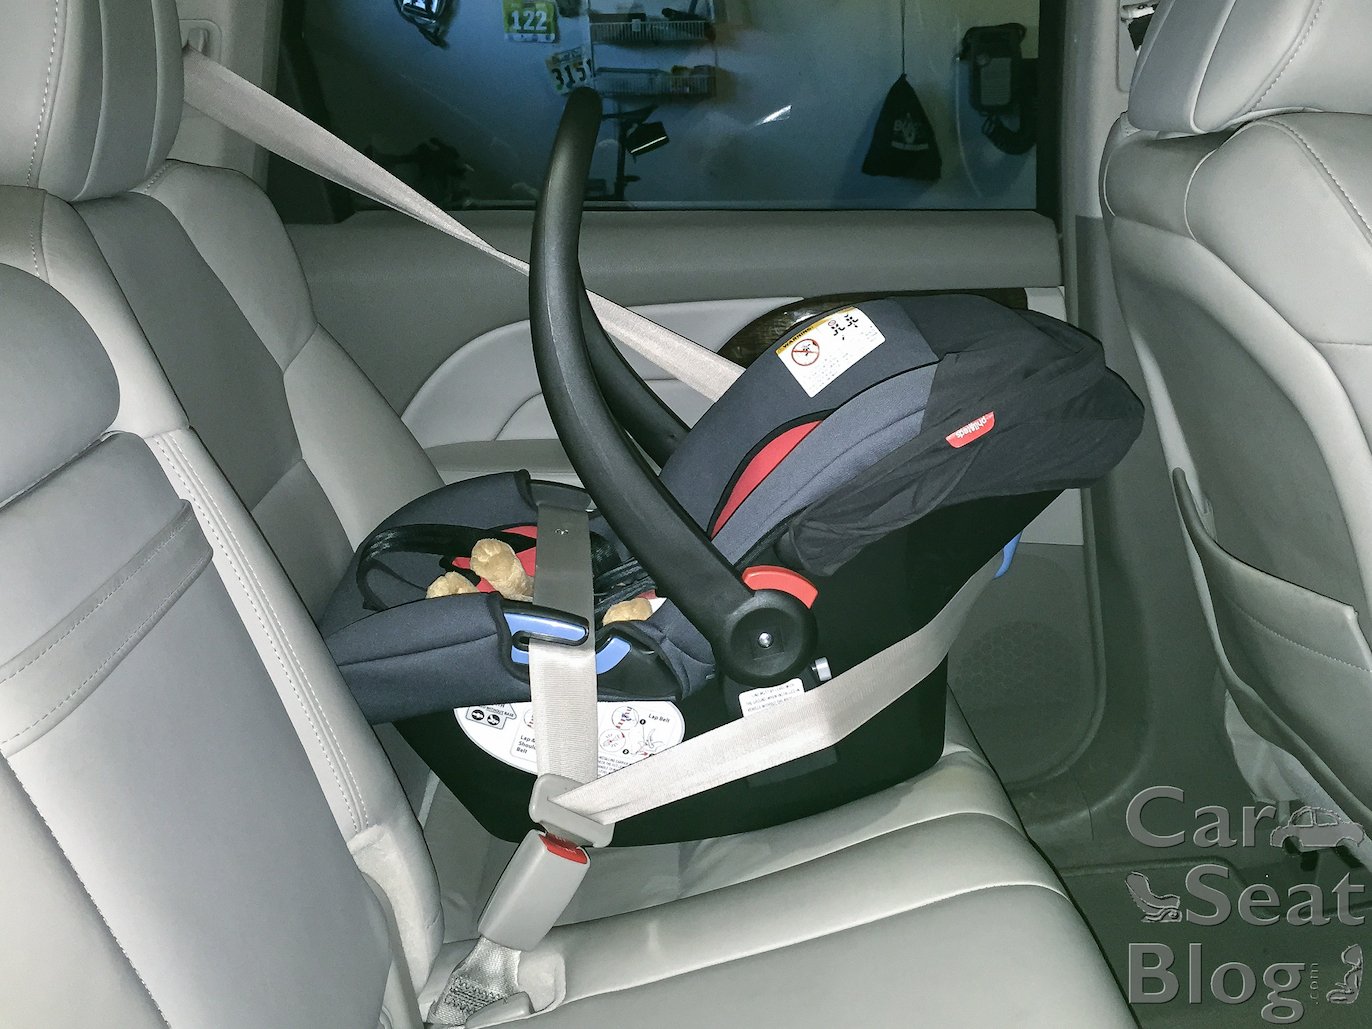 Rear Facing Cats With European, Easiest Car Seat To Install With Seatbelt